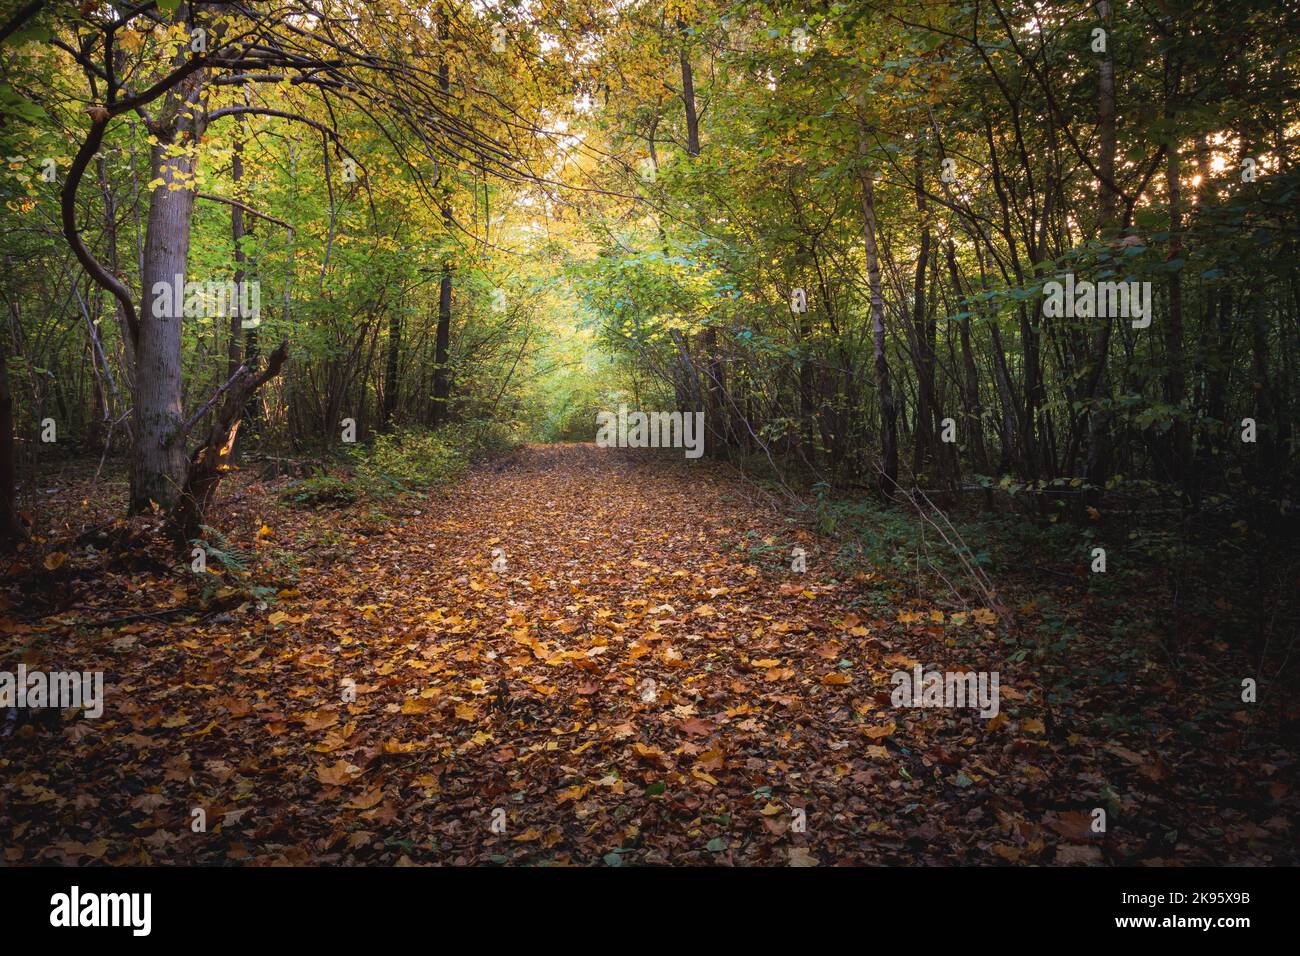 Leafy road in a moody autumn forest Stock Photo